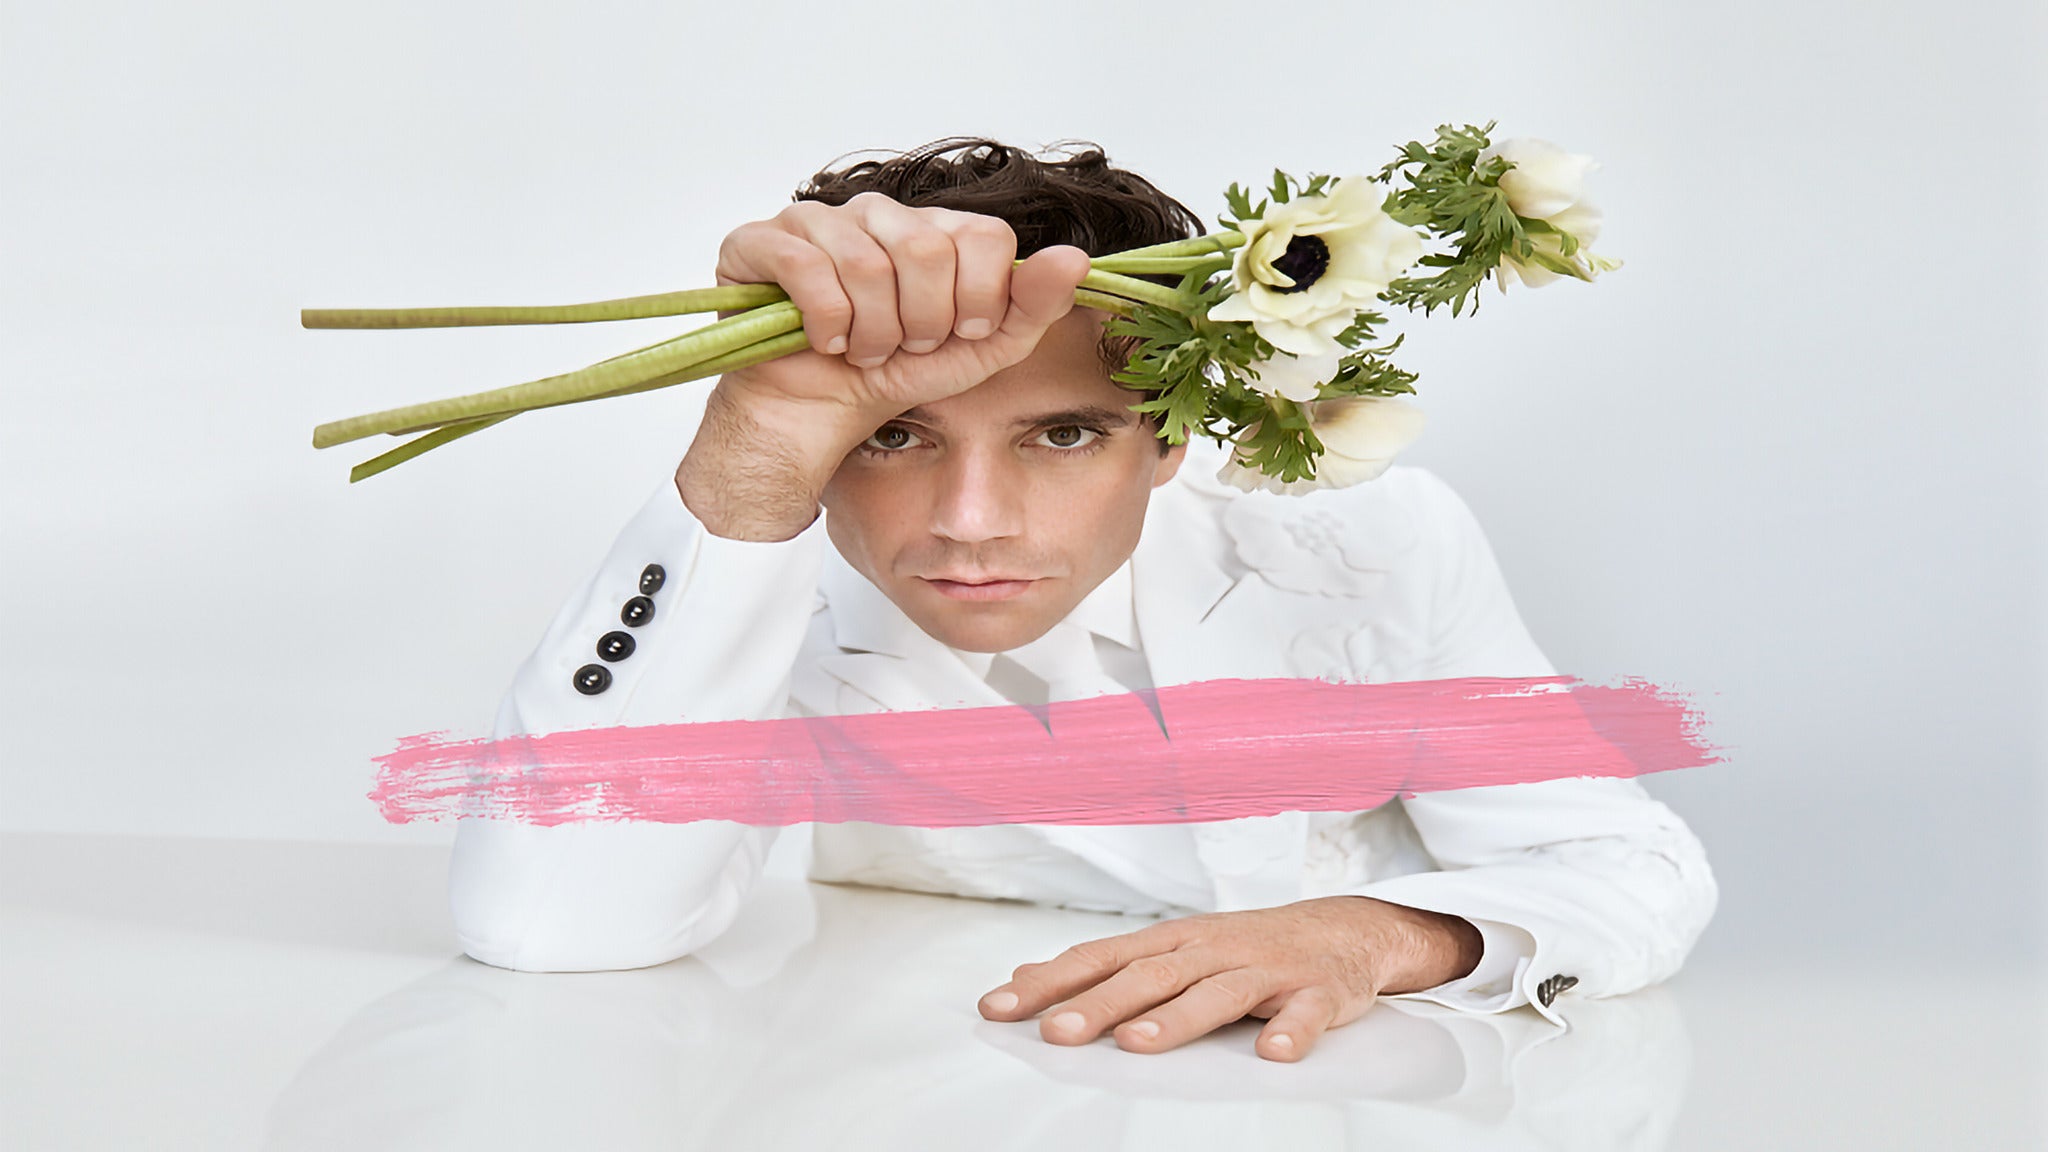 MIKA présenté par Indeed: For The Rite of Spring North America Spring  in Québec promo photo for Billets exclusifs aux clients Rogers presale offer code